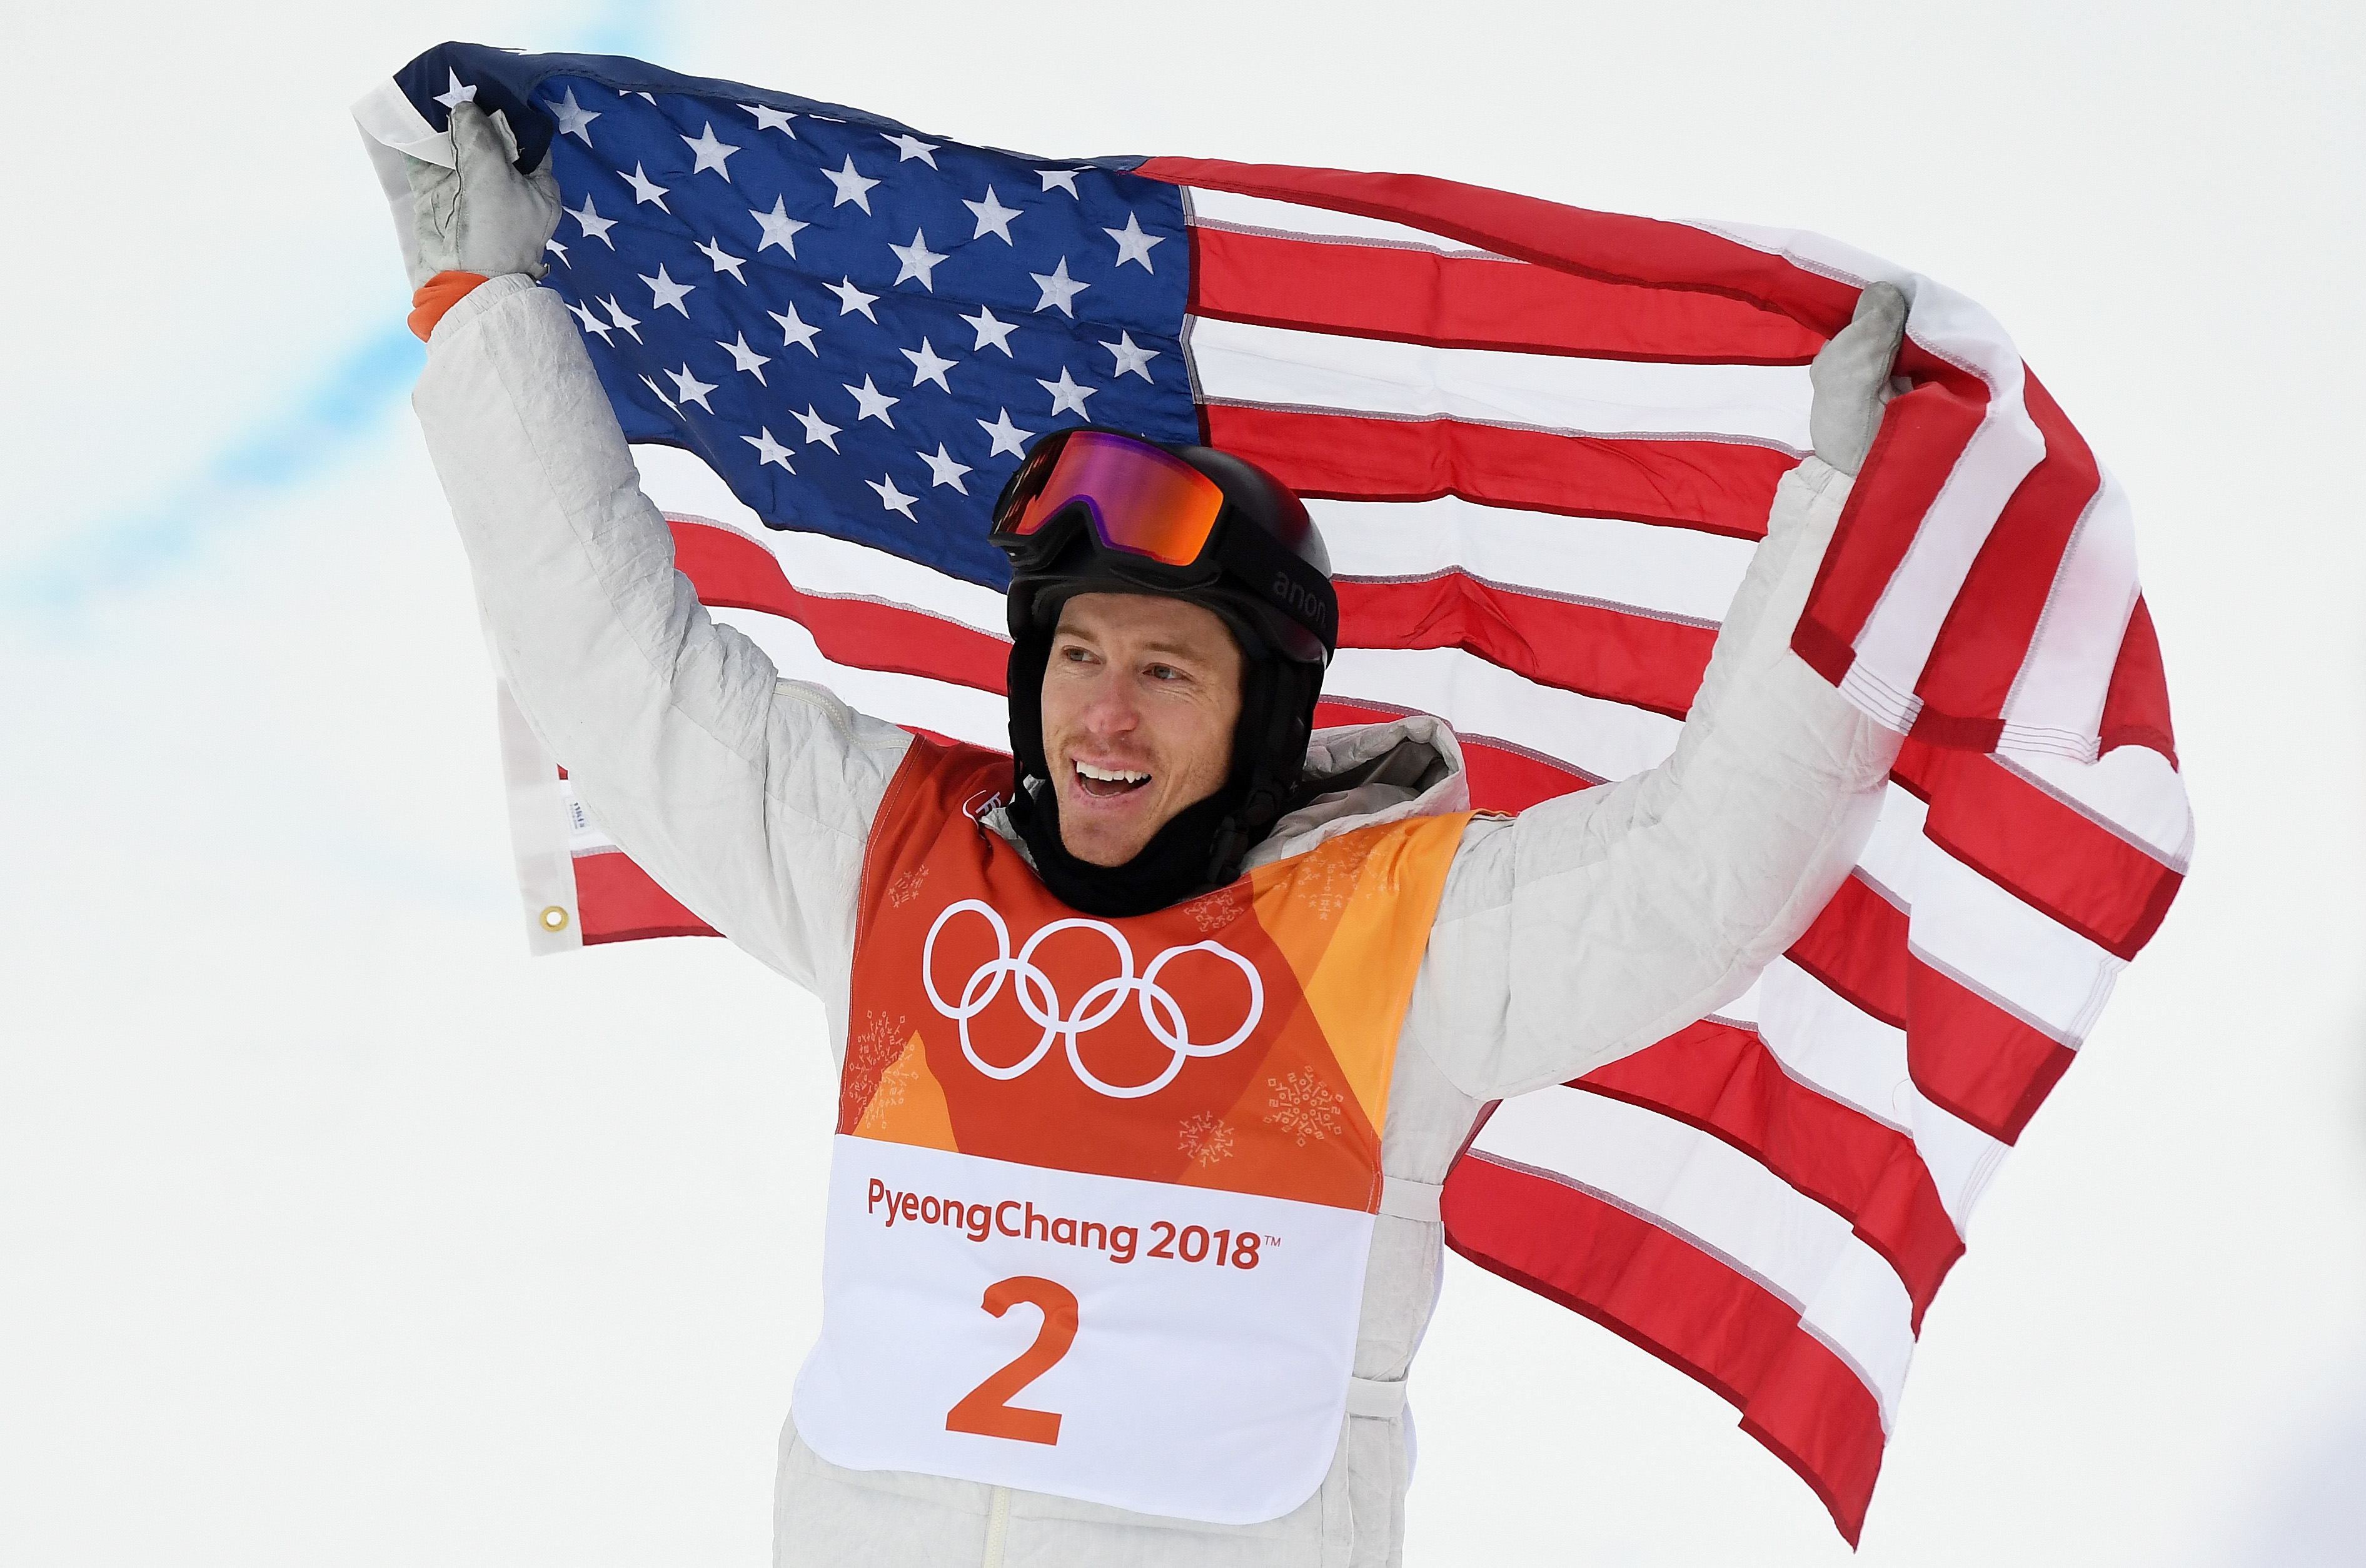 Shaun White Deserves a Gold Medal for Helping Nina Dobrev in New Role